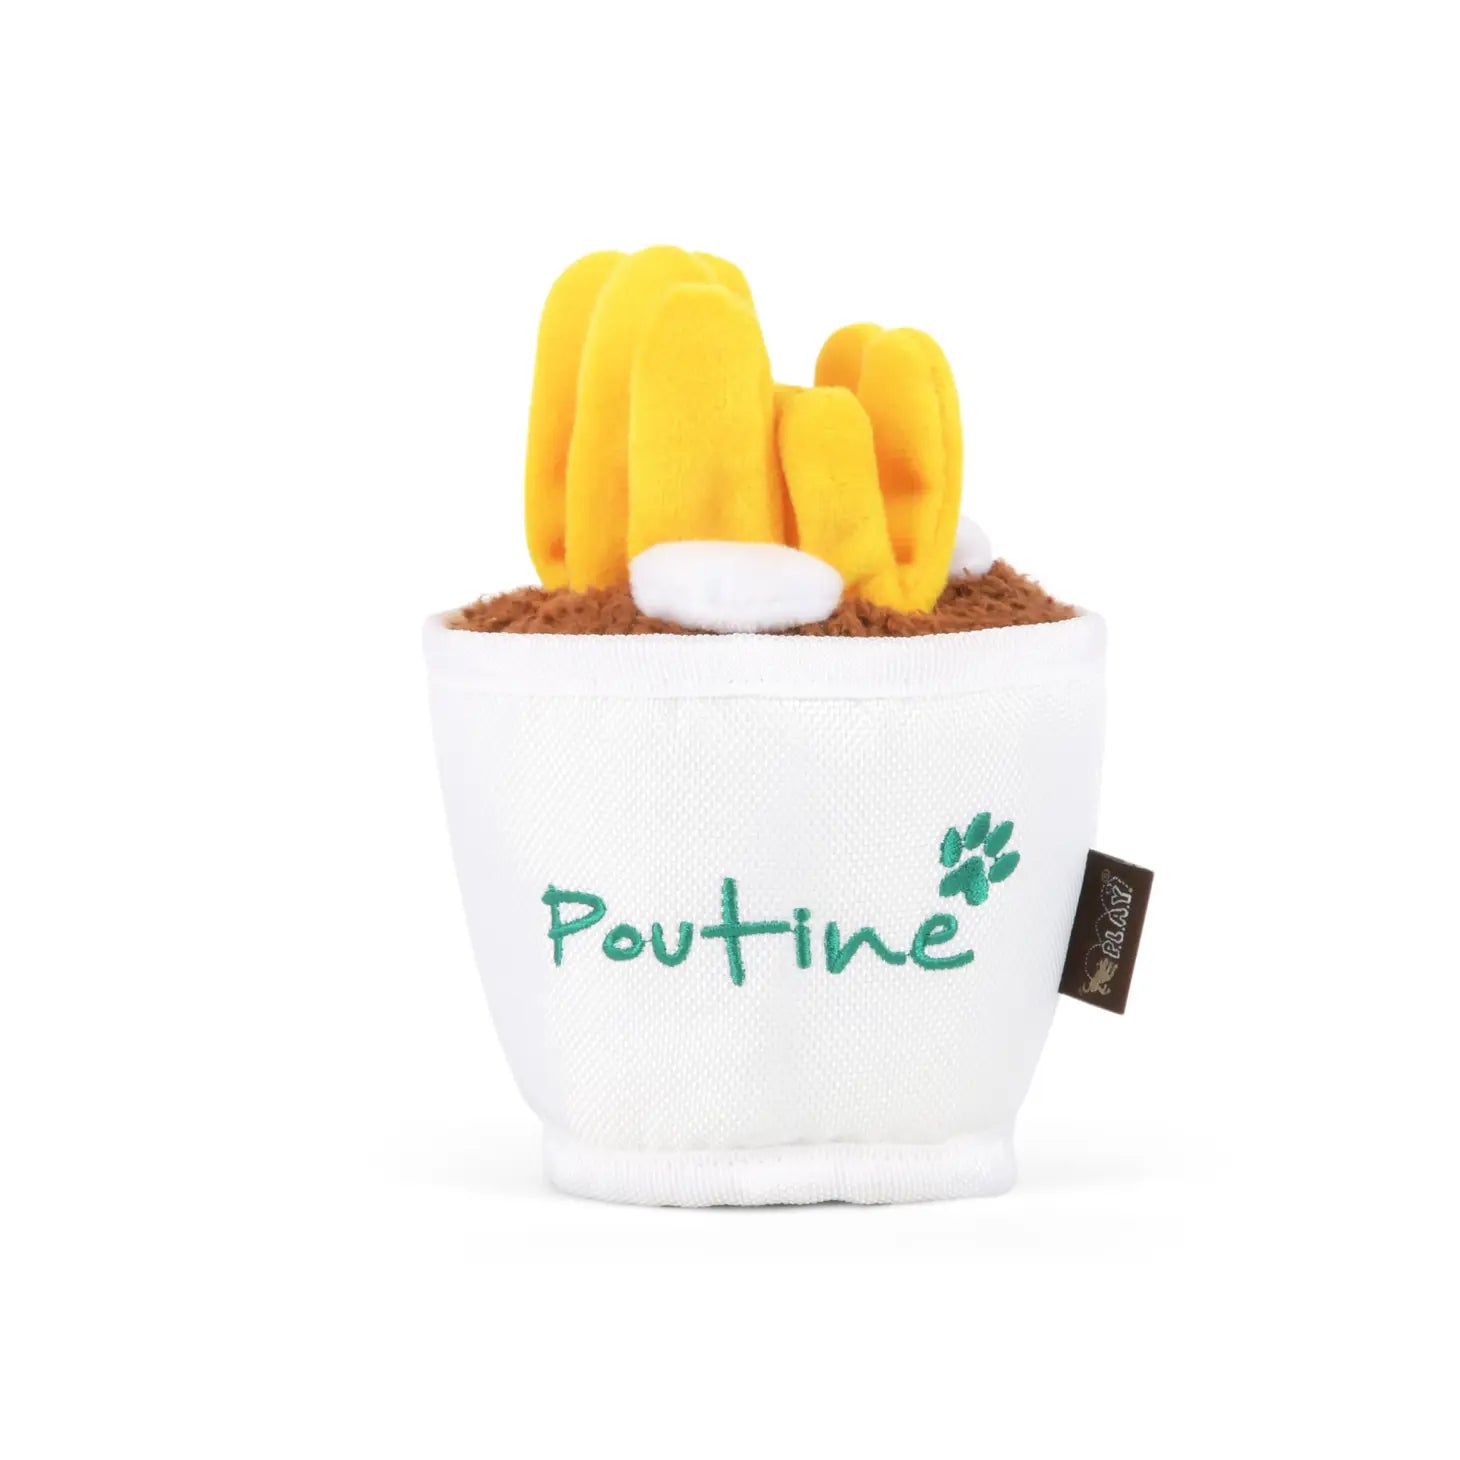 Poutine - Fries In Cup Of Gravy - Earth Rated